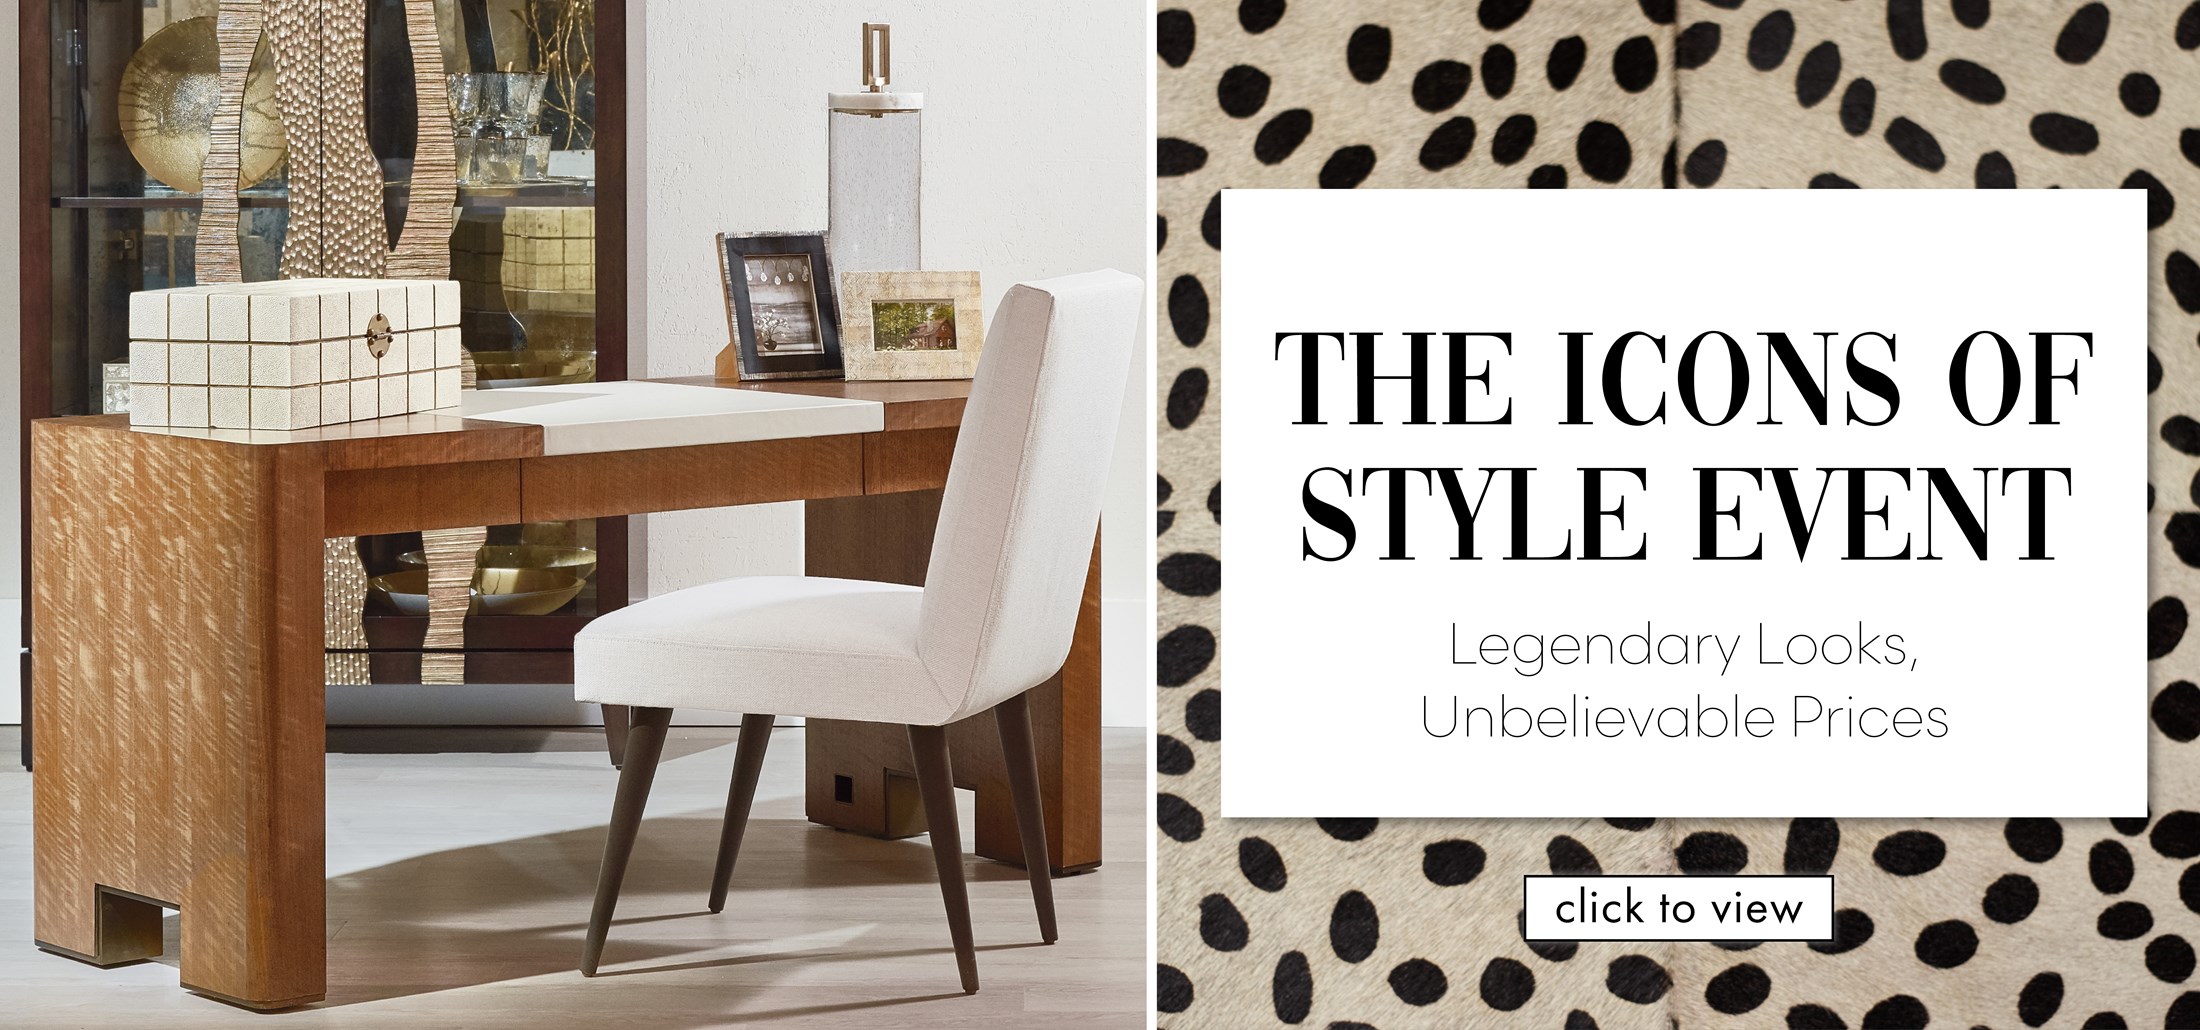 Image of a chair with a wooden desk. Text: The Icons of Style Event. Legendary Looks, Unbelievable Prices. Click to view. Links to The Icons of Style Event.